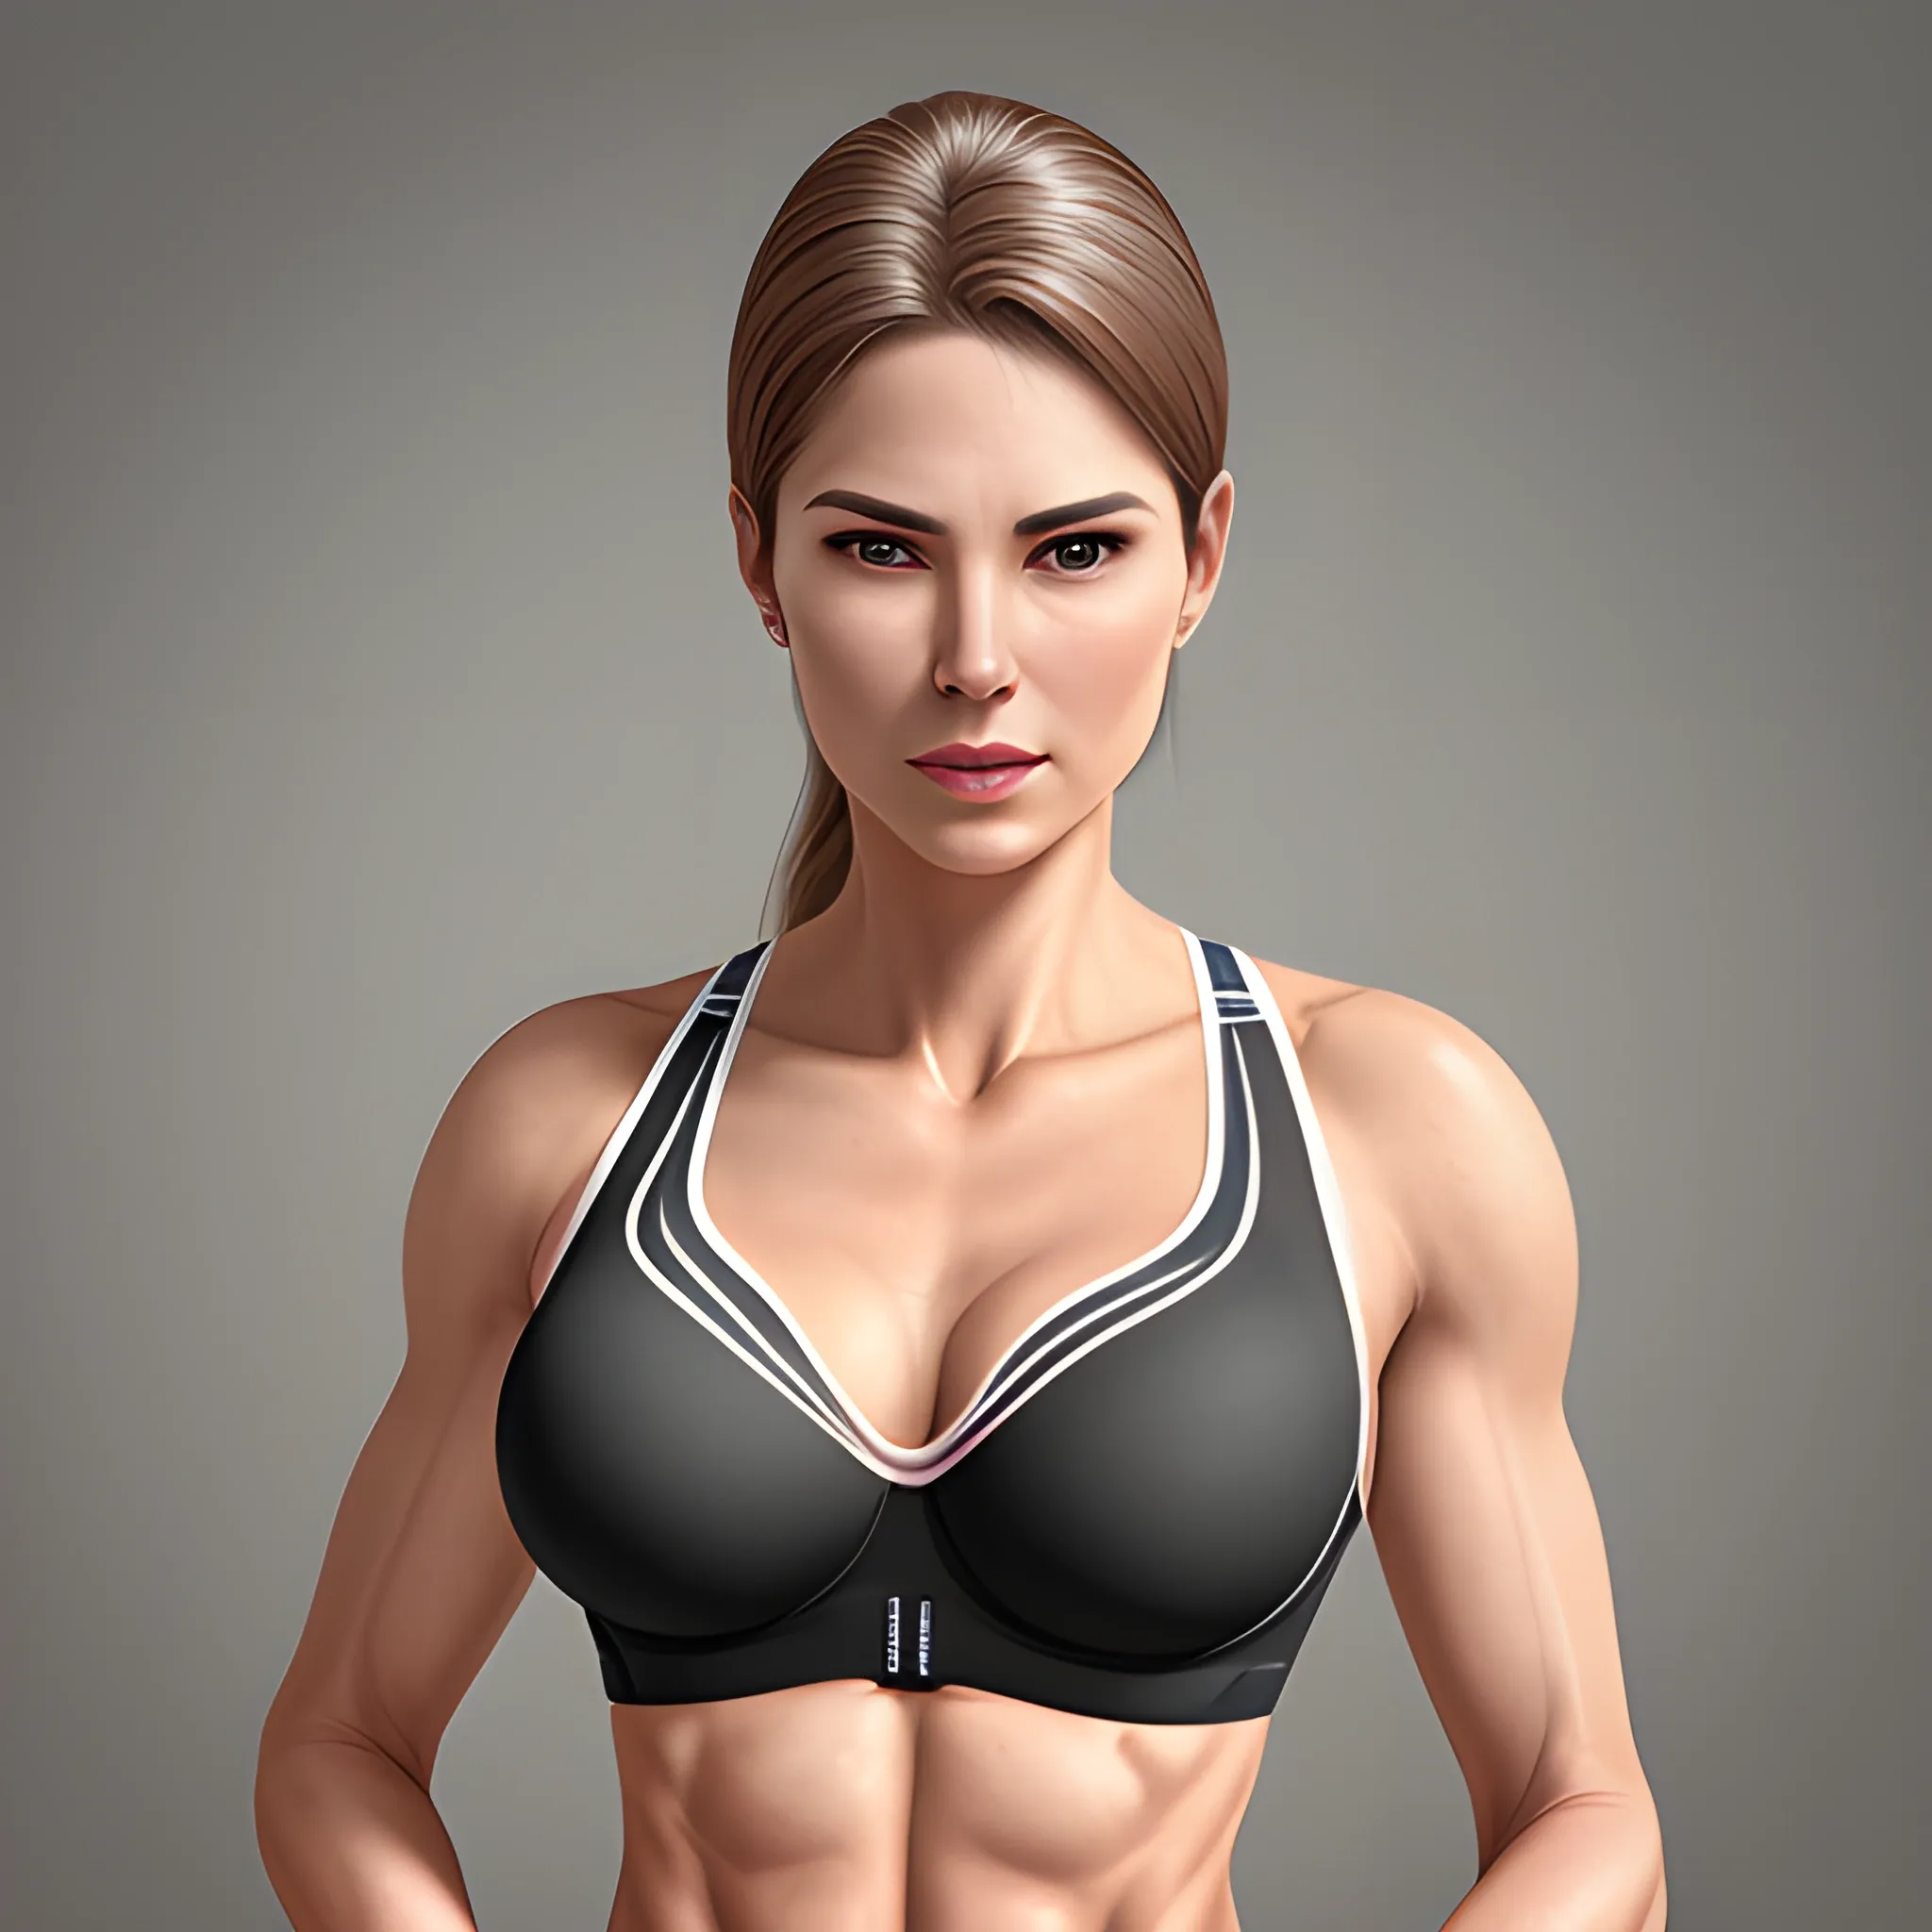 An elegant woman mature a athlete with bra , eye-catching detail, realistic ultra-detailed